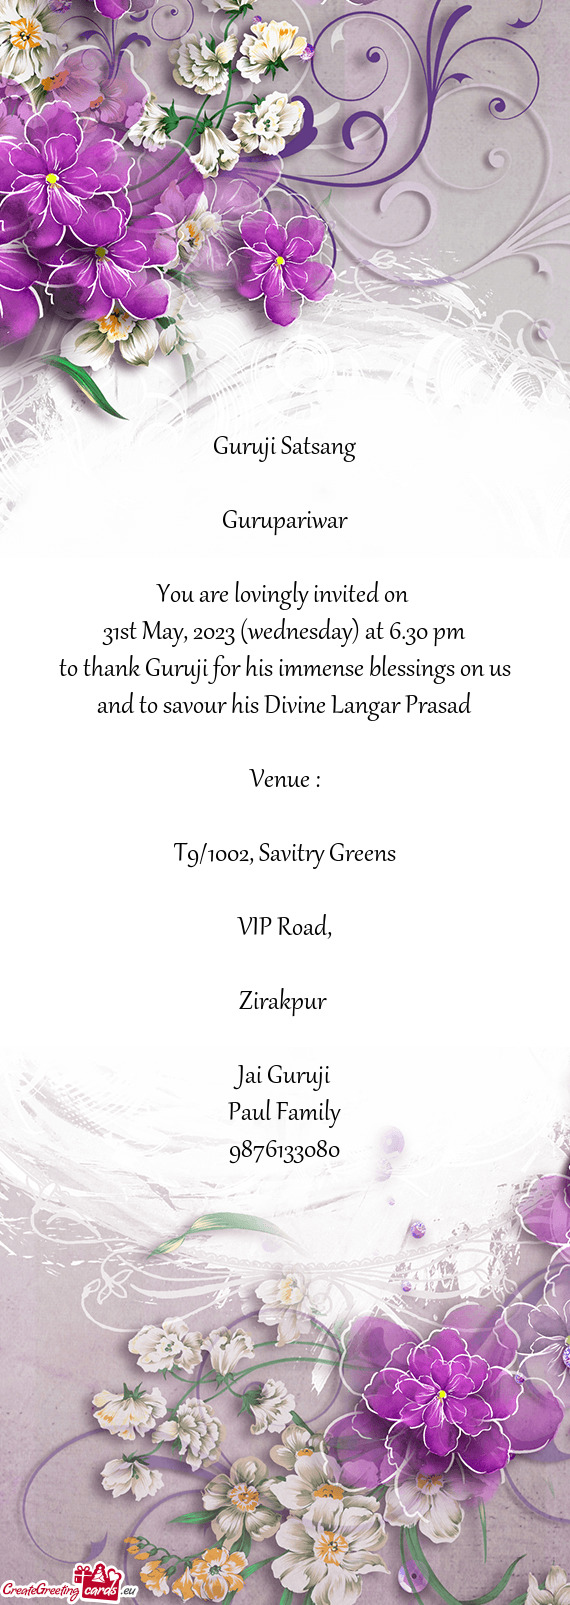 31st May, 2023 (wednesday) at 6.30 pm